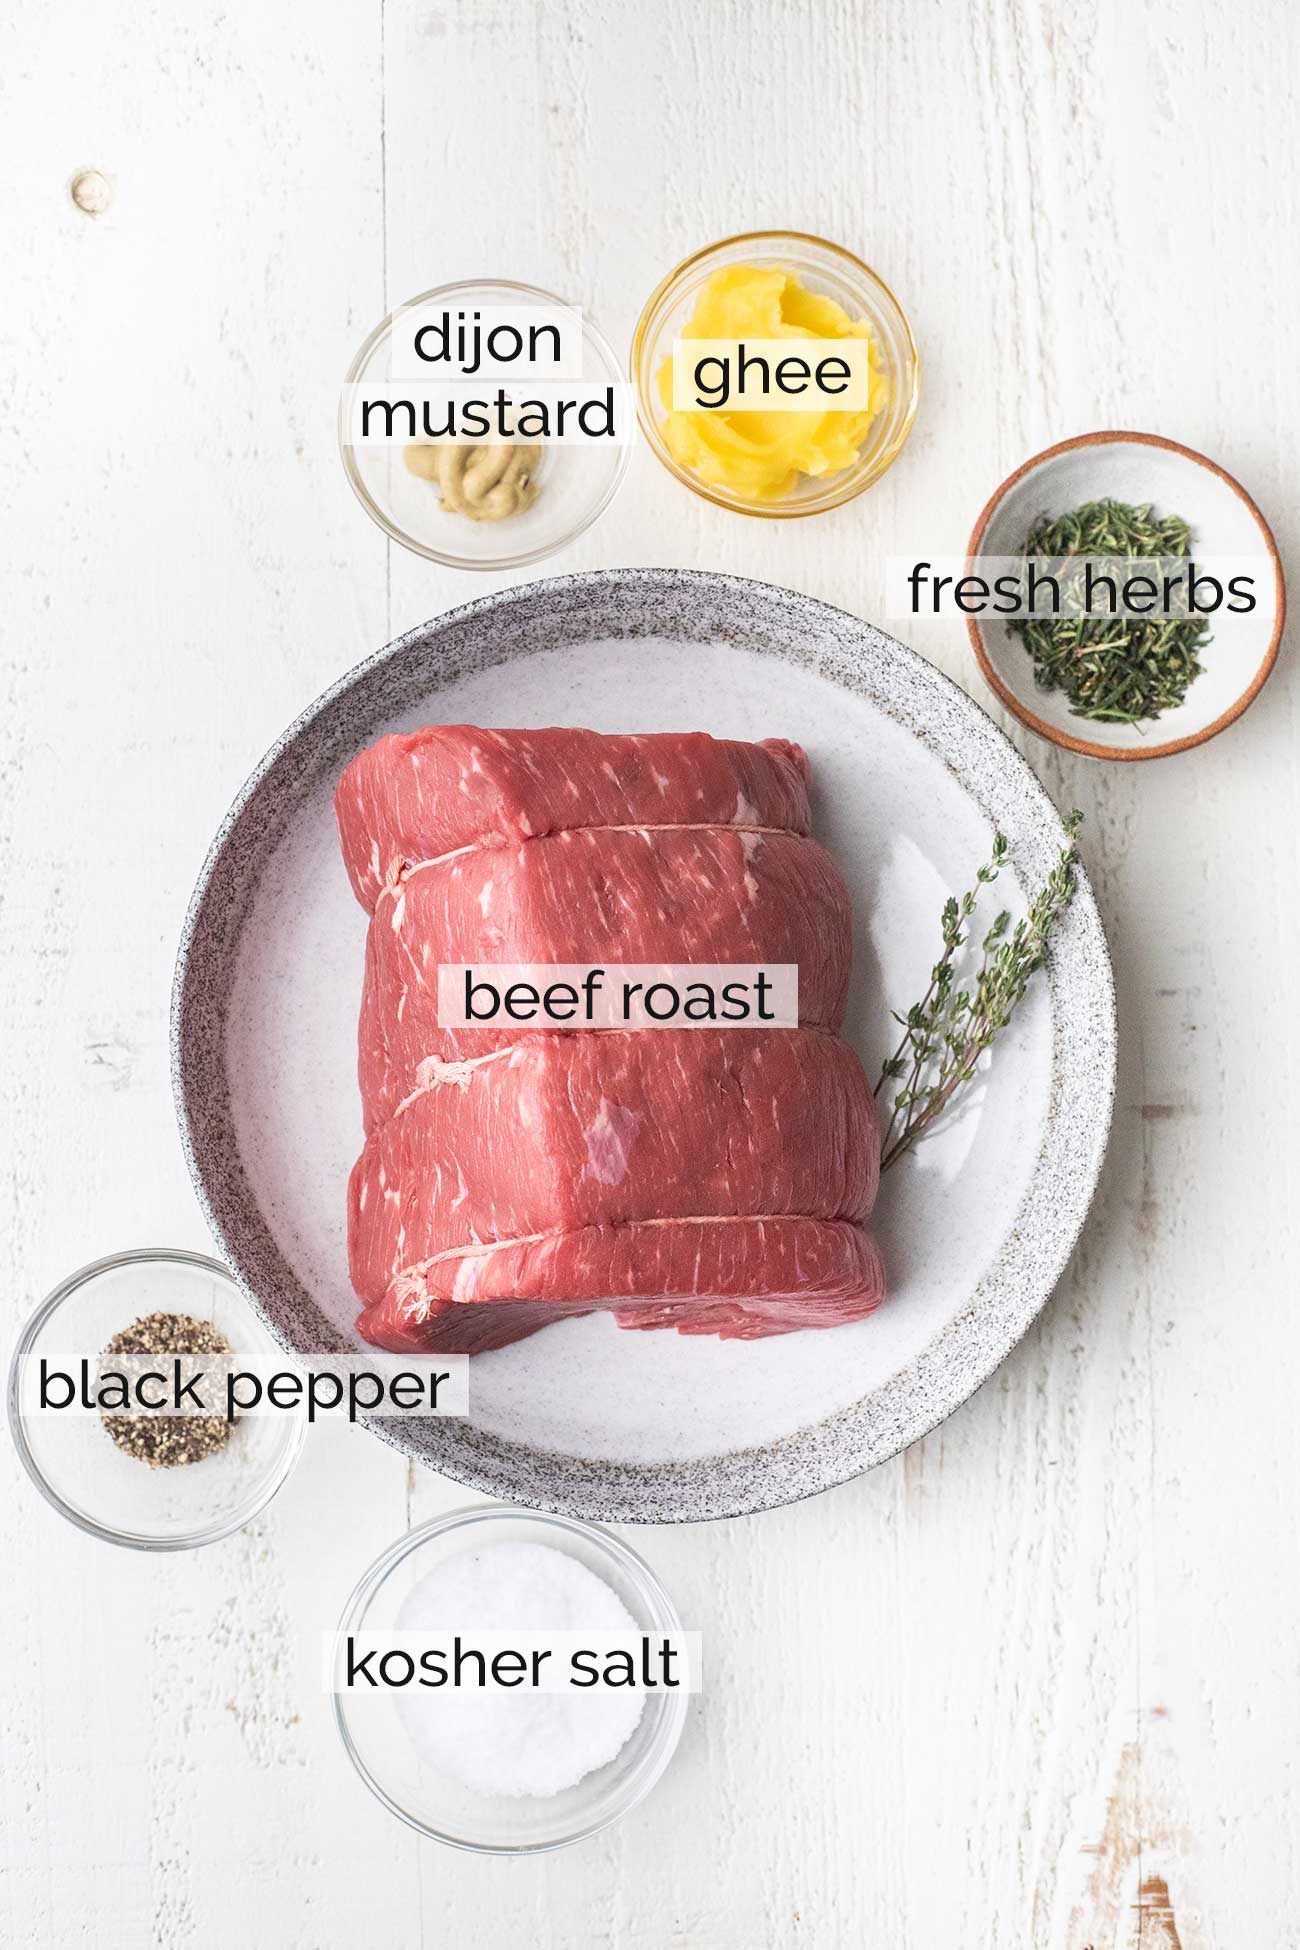 The ingredients needed to make roast beef coated in an herbed butter.